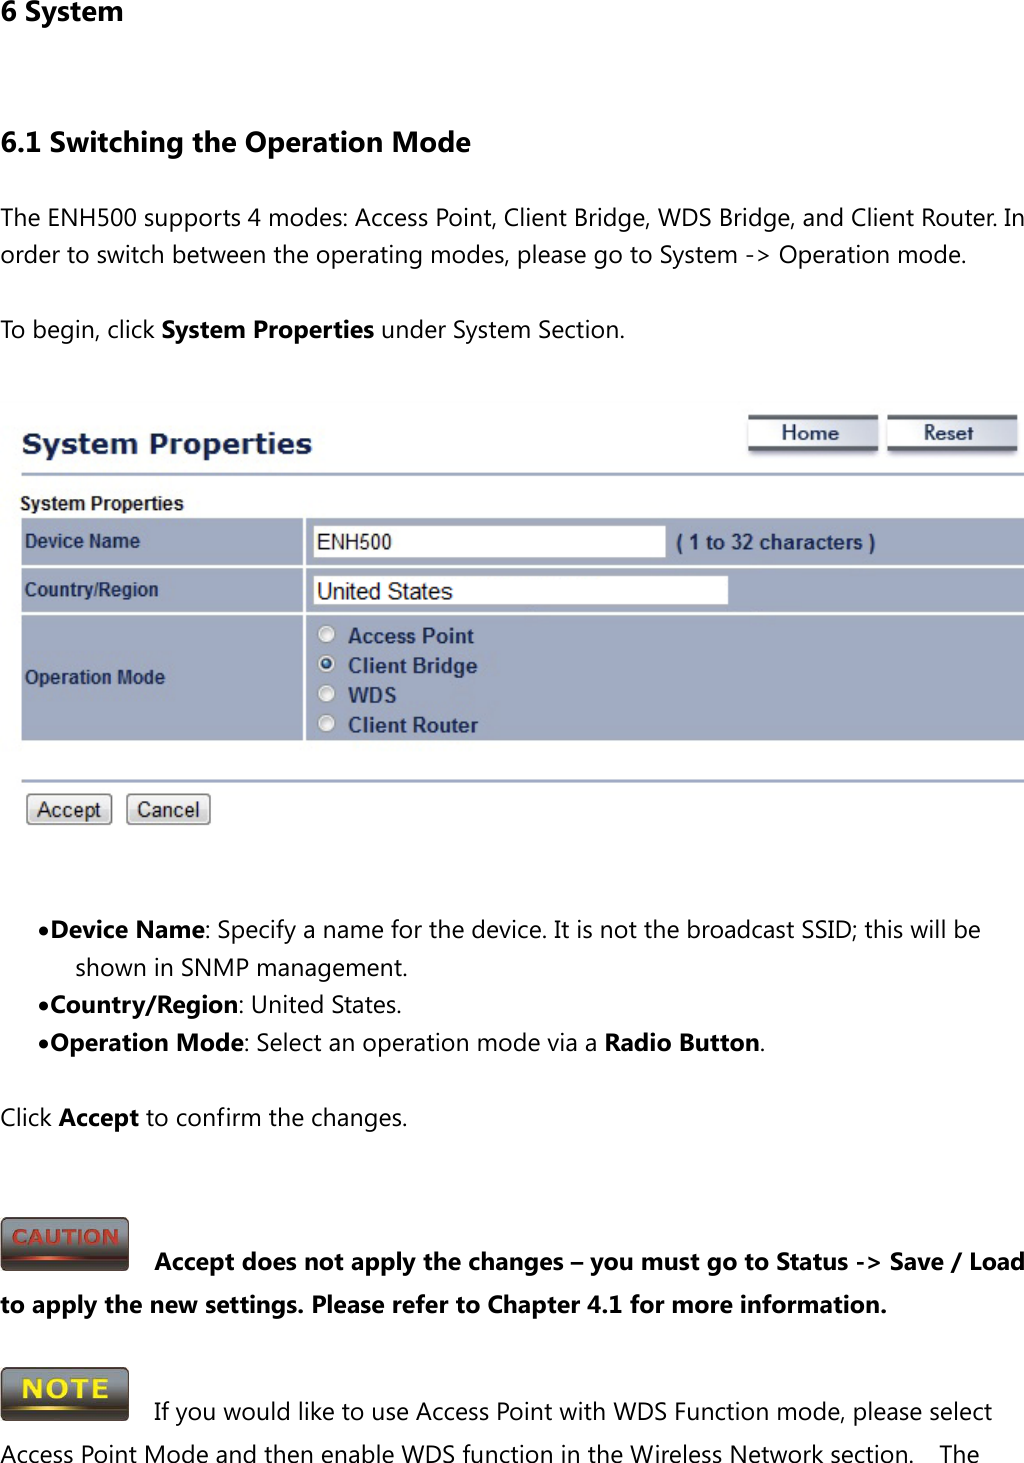 6 System 6.1 Switching the Operation Mode The ENH500 supports 4 modes: Access Point, Client Bridge, WDS Bridge, and Client Router. In order to switch between the operating modes, please go to System -&gt; Operation mode.  To begin, click System Properties under System Section.   • Device Name: Specify a name for the device. It is not the broadcast SSID; this will be shown in SNMP management. • Country/Region: United States. • Operation Mode: Select an operation mode via a Radio Button.  Click Accept to confirm the changes.     Accept does not apply the changes – you must go to Status -&gt; Save / Load to apply the new settings. Please refer to Chapter 4.1 for more information.    If you would like to use Access Point with WDS Function mode, please select Access Point Mode and then enable WDS function in the Wireless Network section.    The 